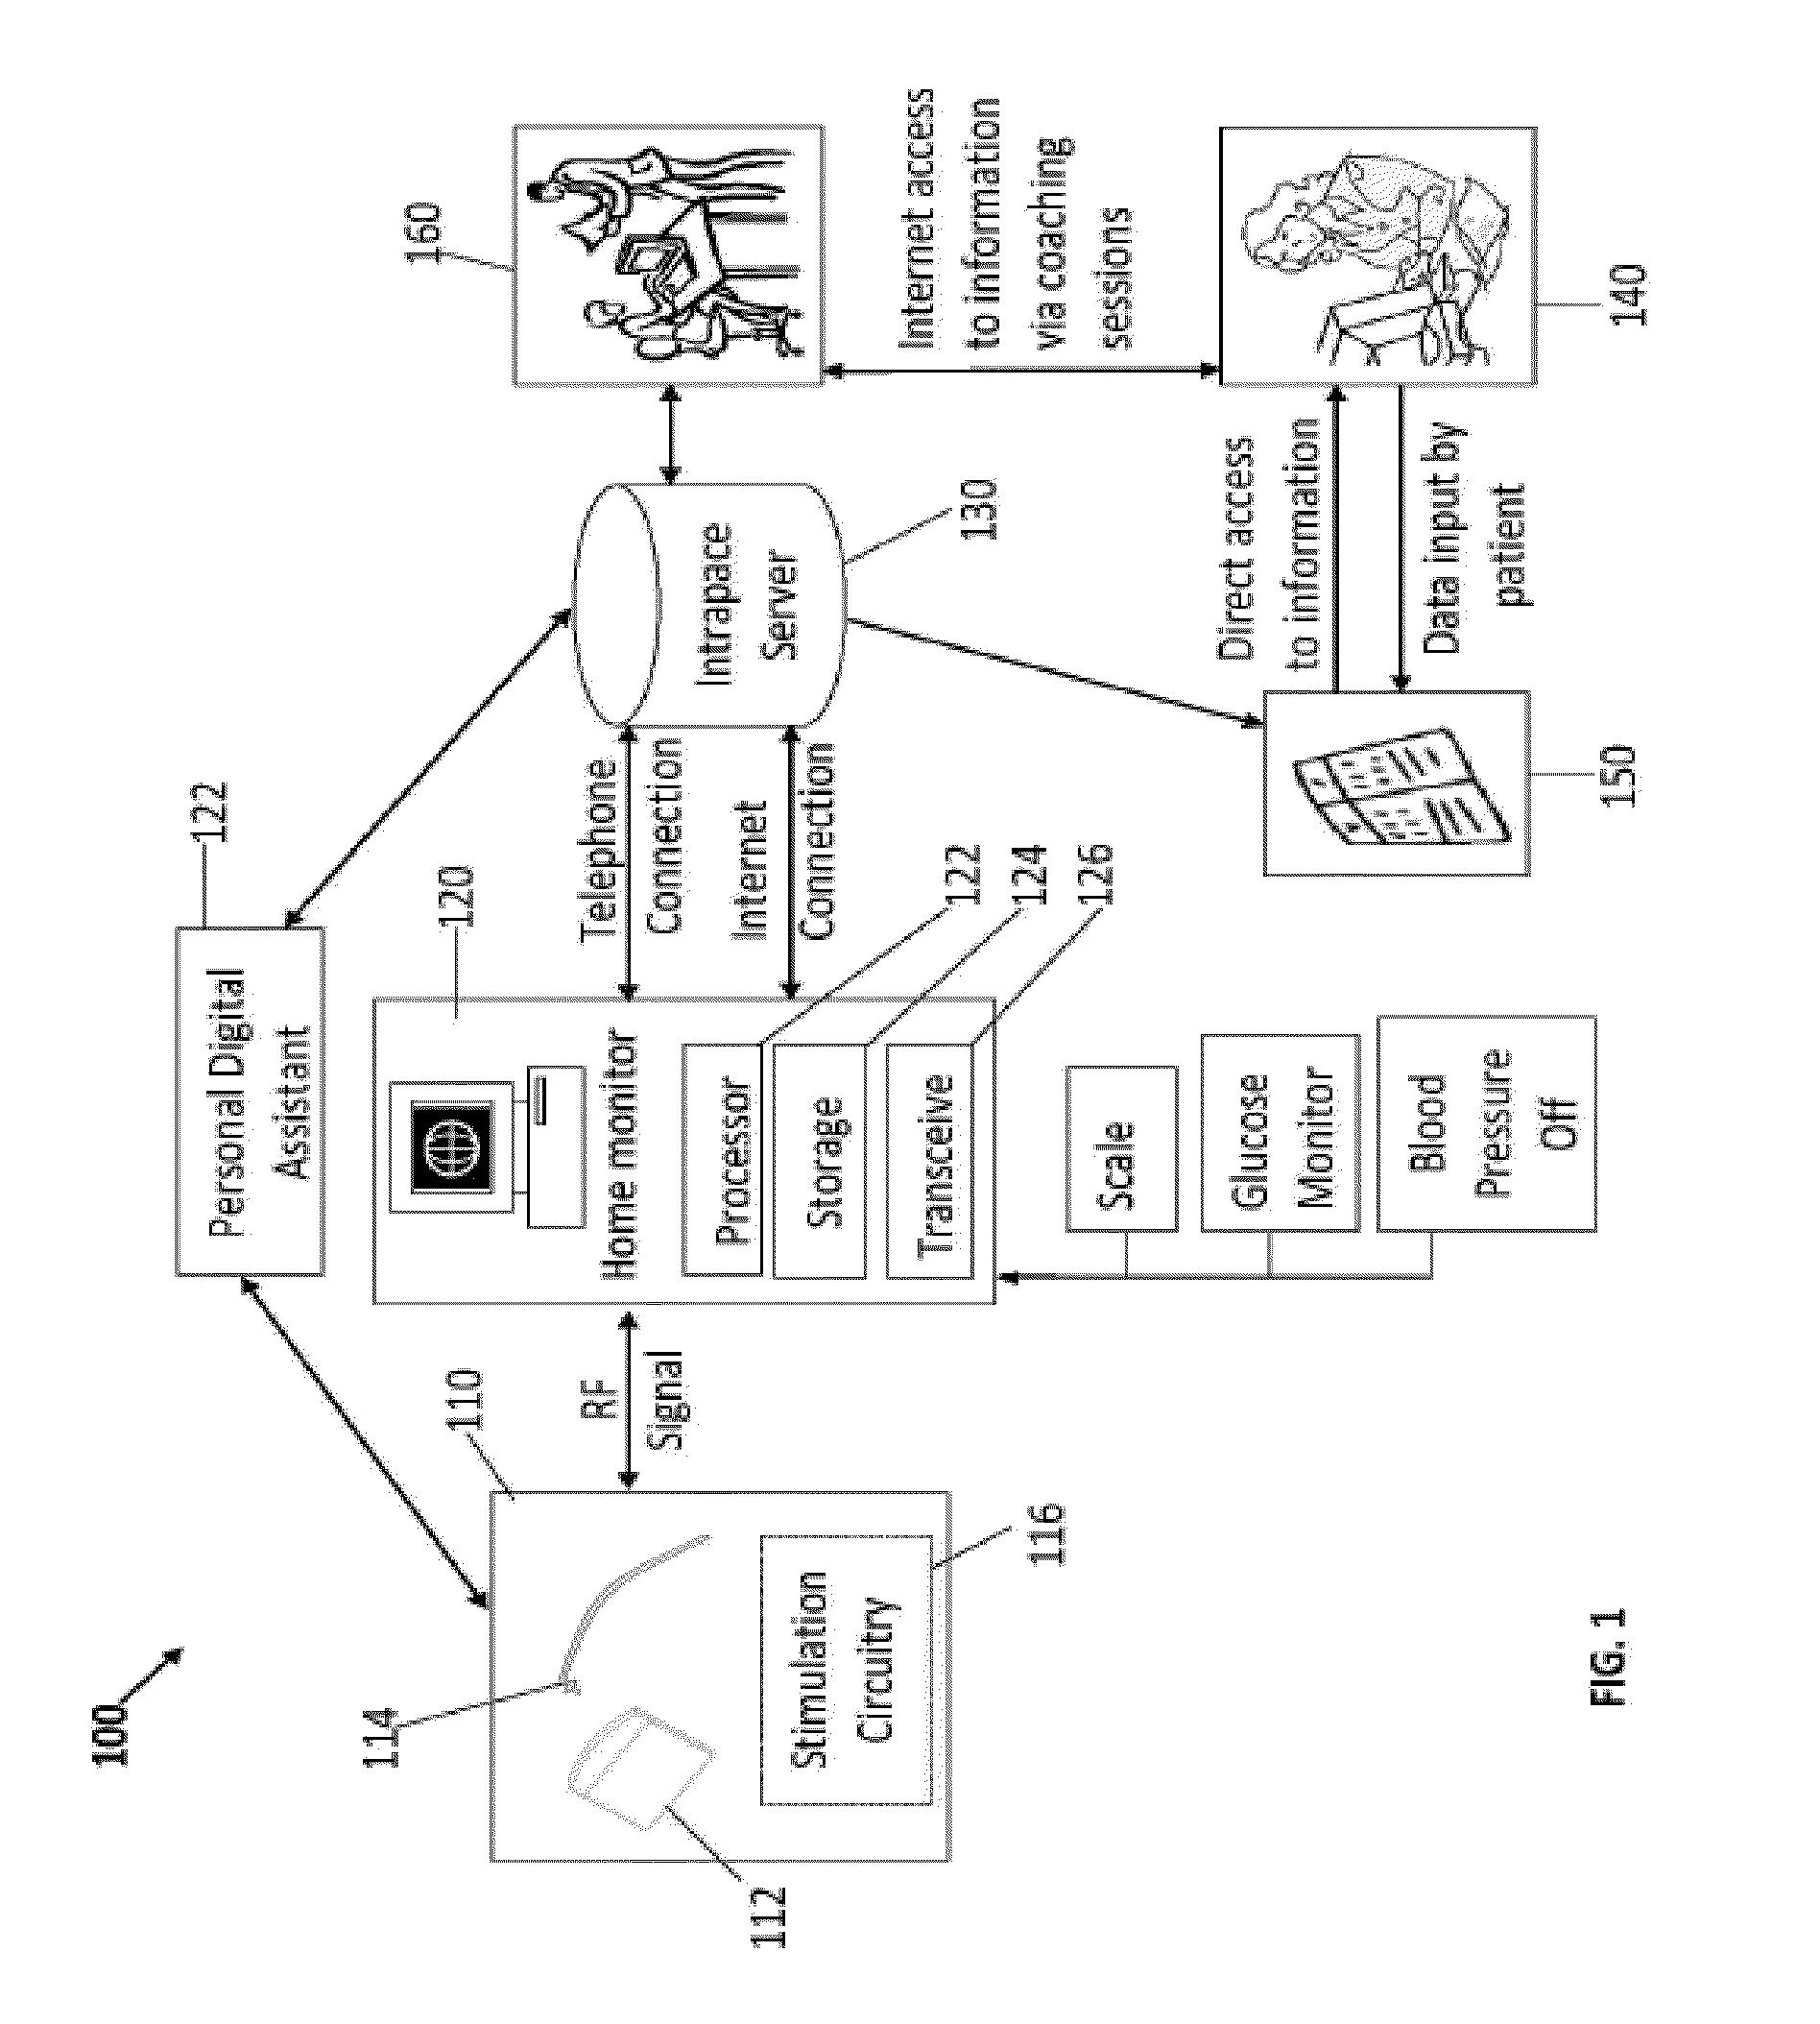 Feedback systems and methods to enhance obstructive and other obesity treatments